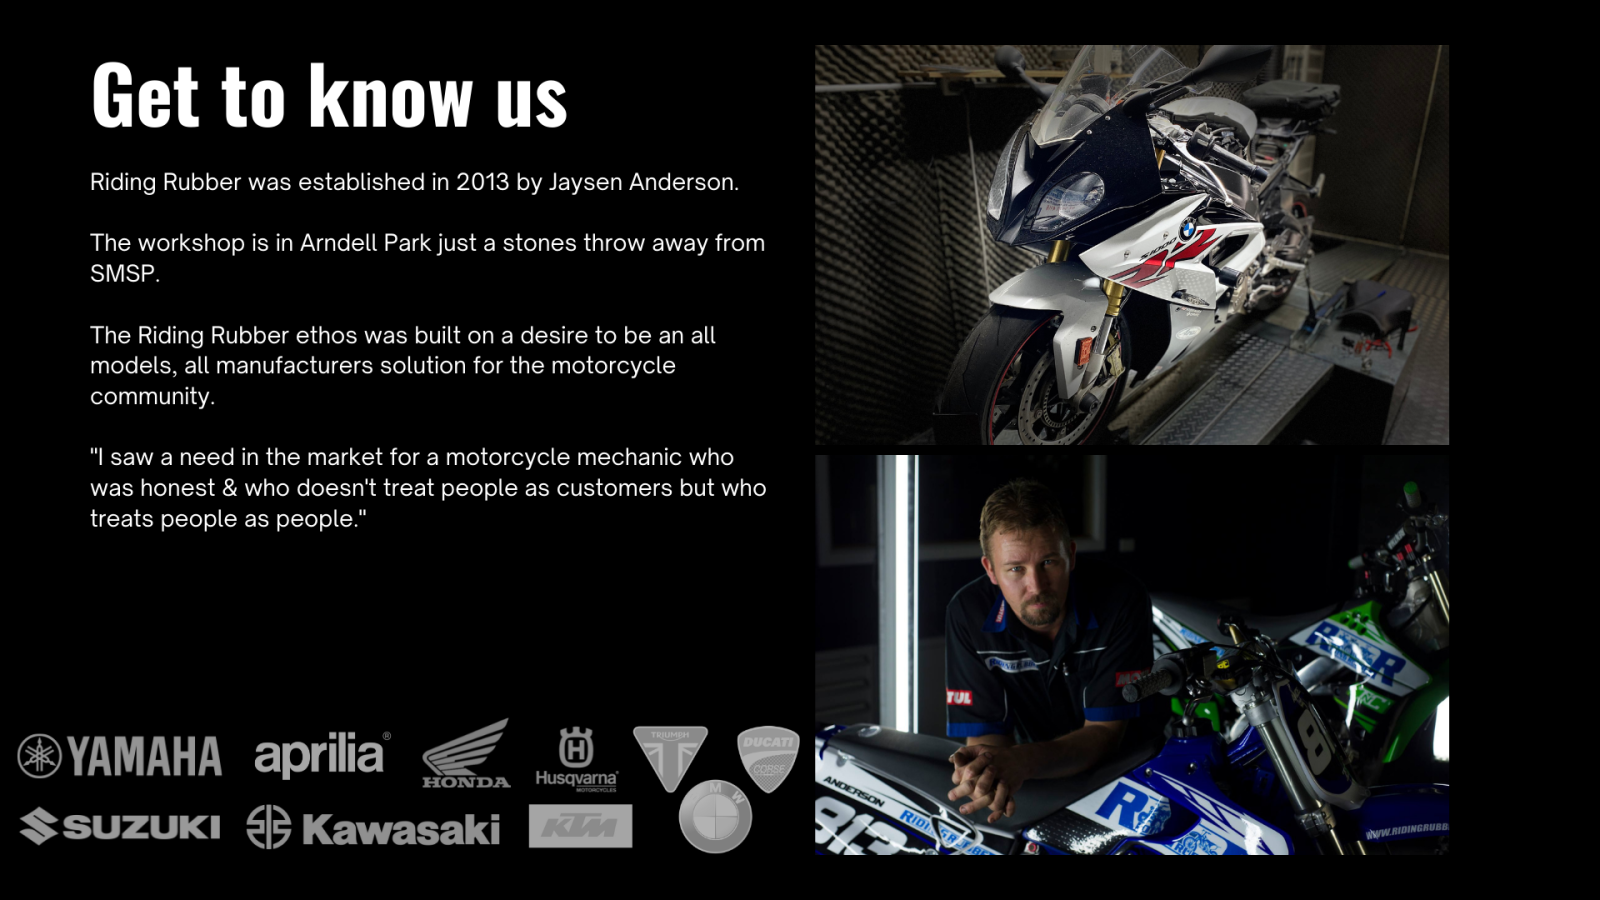 Get to know us. Riding Rubber was established in 2013 by Jaysen Anderson.   The workshop is in Arndell Park just a stones throw away from SMSP Syndey Motorsport Park.  The Riding Rubber ethos was built on a desire to be an all models, all manufacturers solution for the motorcycle community.  "I saw a need in the market for a motorcycle mechanic who was honest & who doesn't treat people as customers but who treats people as people."